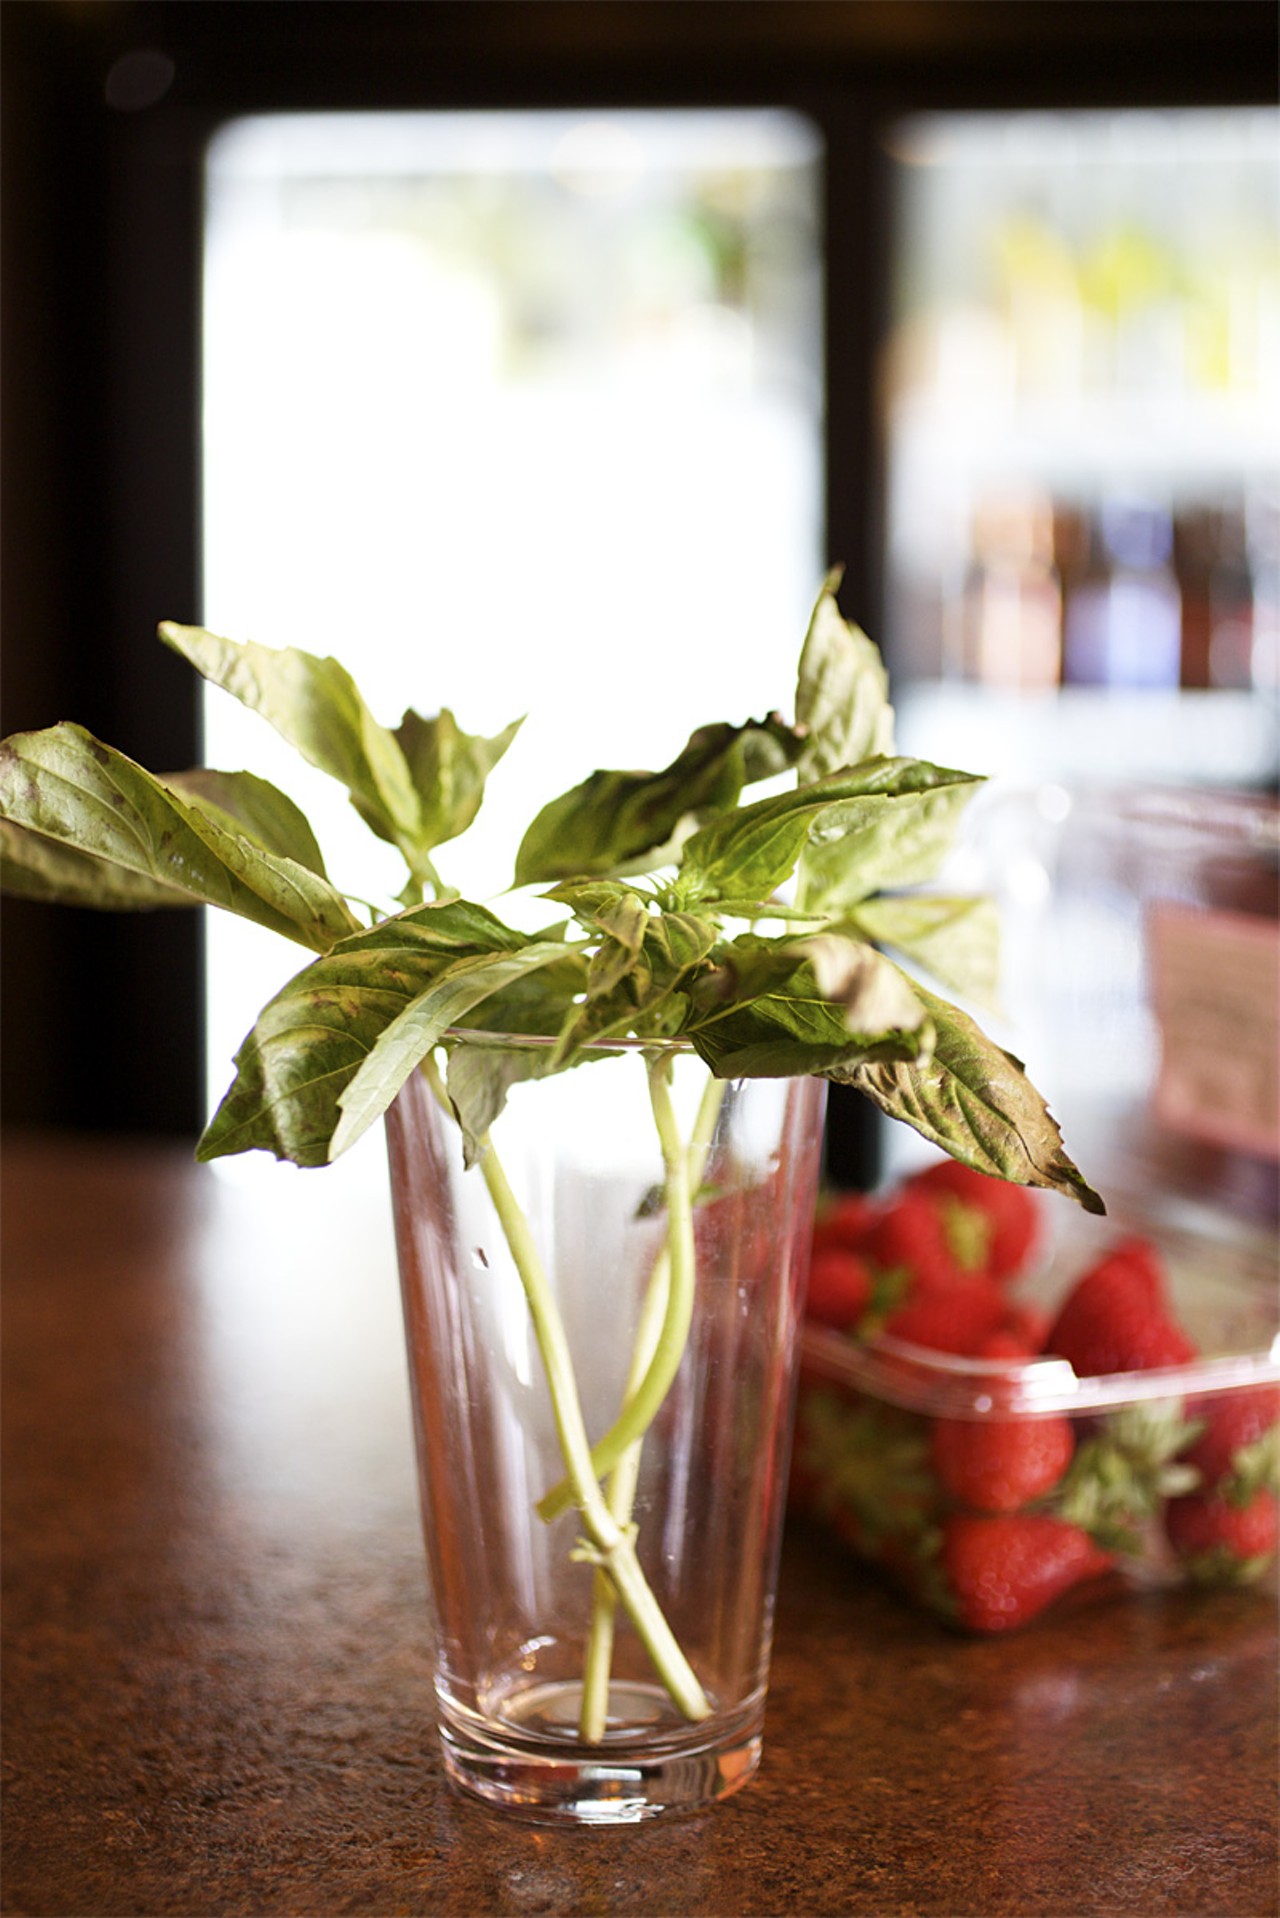 Fresh organic basil and strawberries are out in preparation for Nosh's strawberry basil mojito.